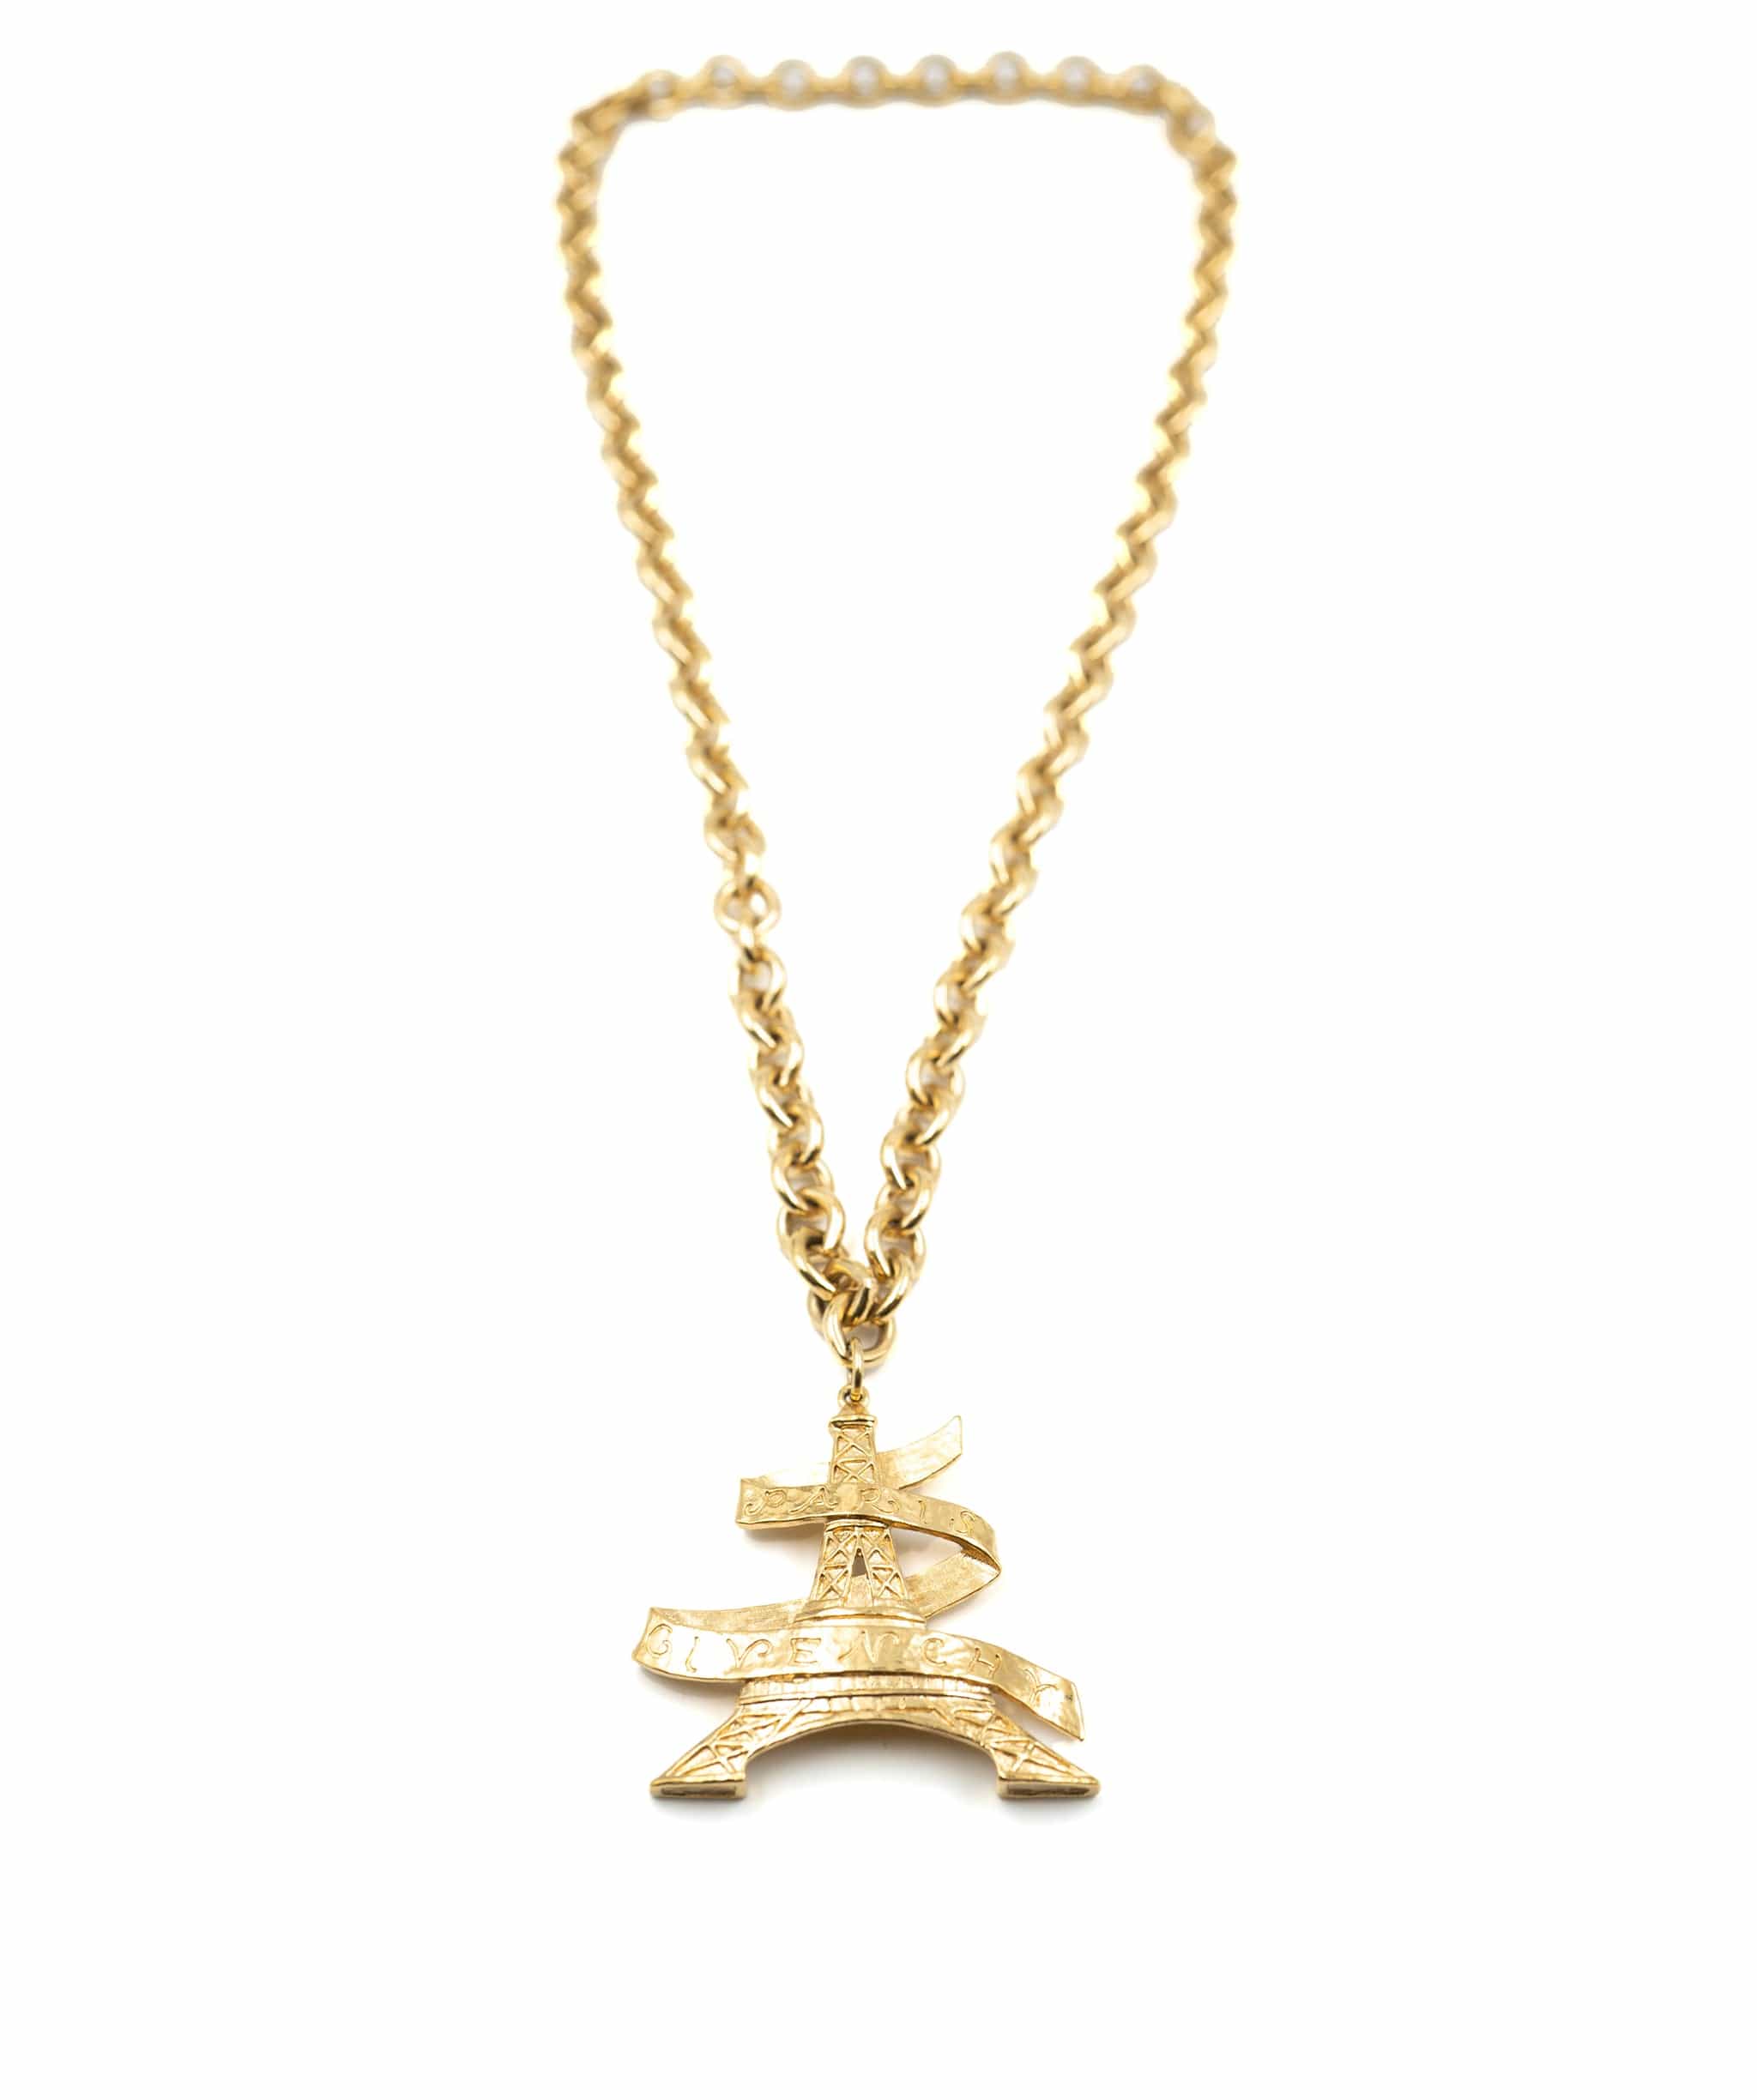 Givenchy Givenchy Eiffel tower top necklace - AWL3628